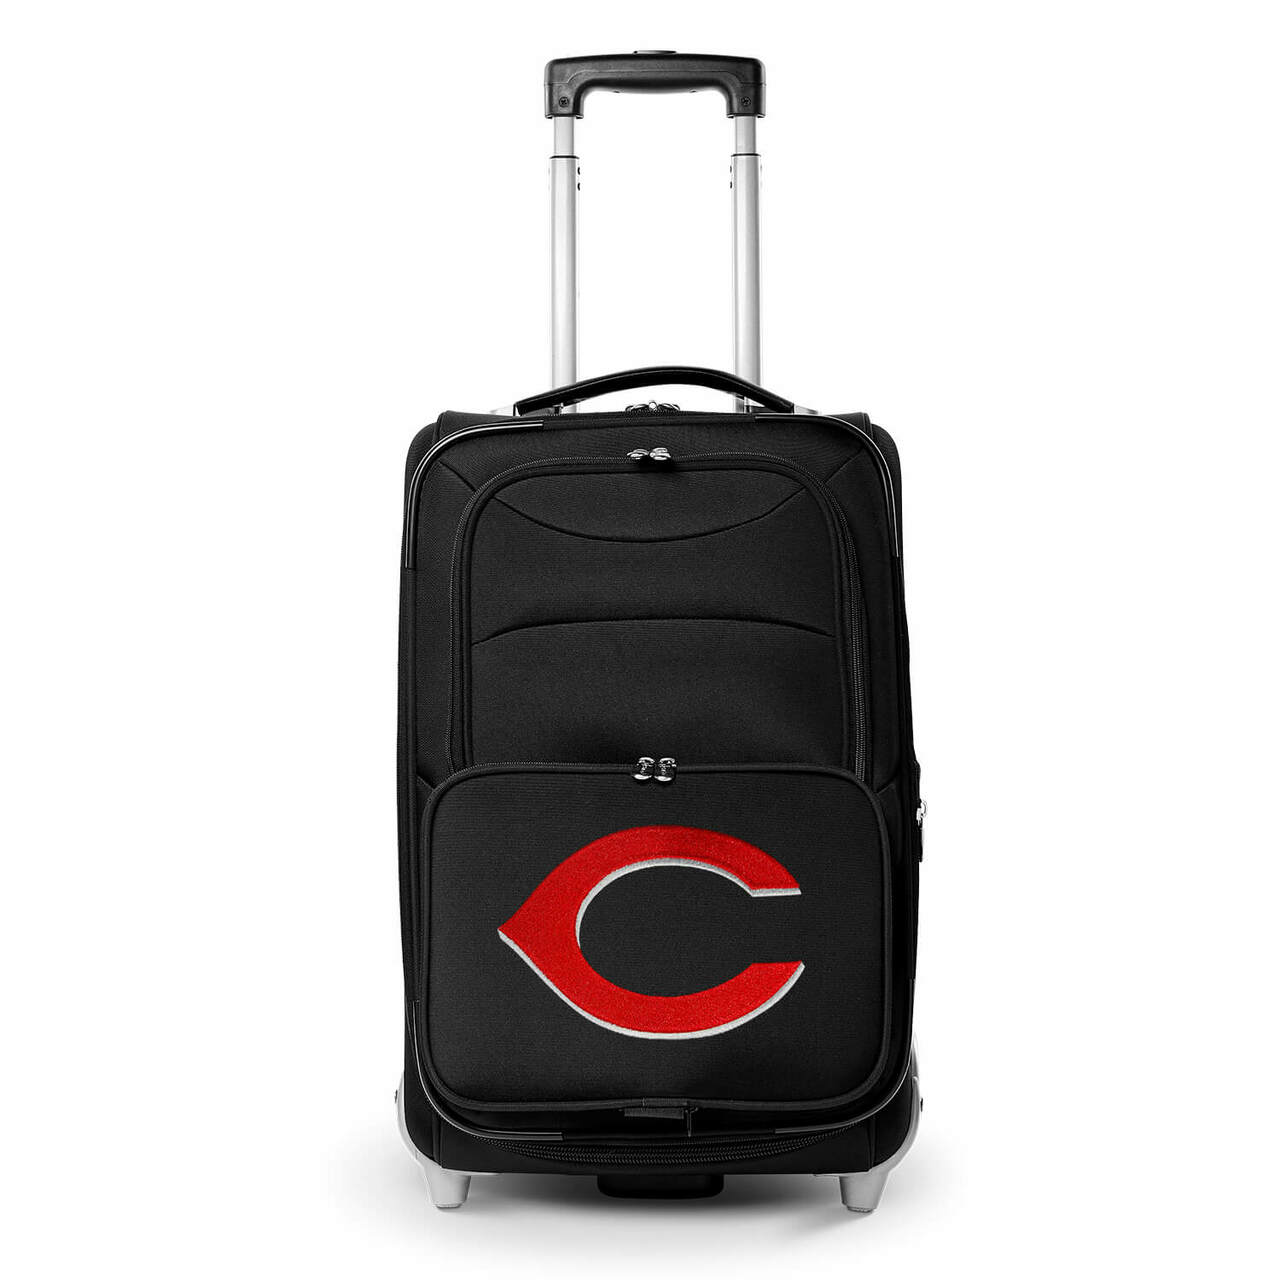 Reds Carry On Luggage | Cincinnati Reds Rolling Carry On Luggage